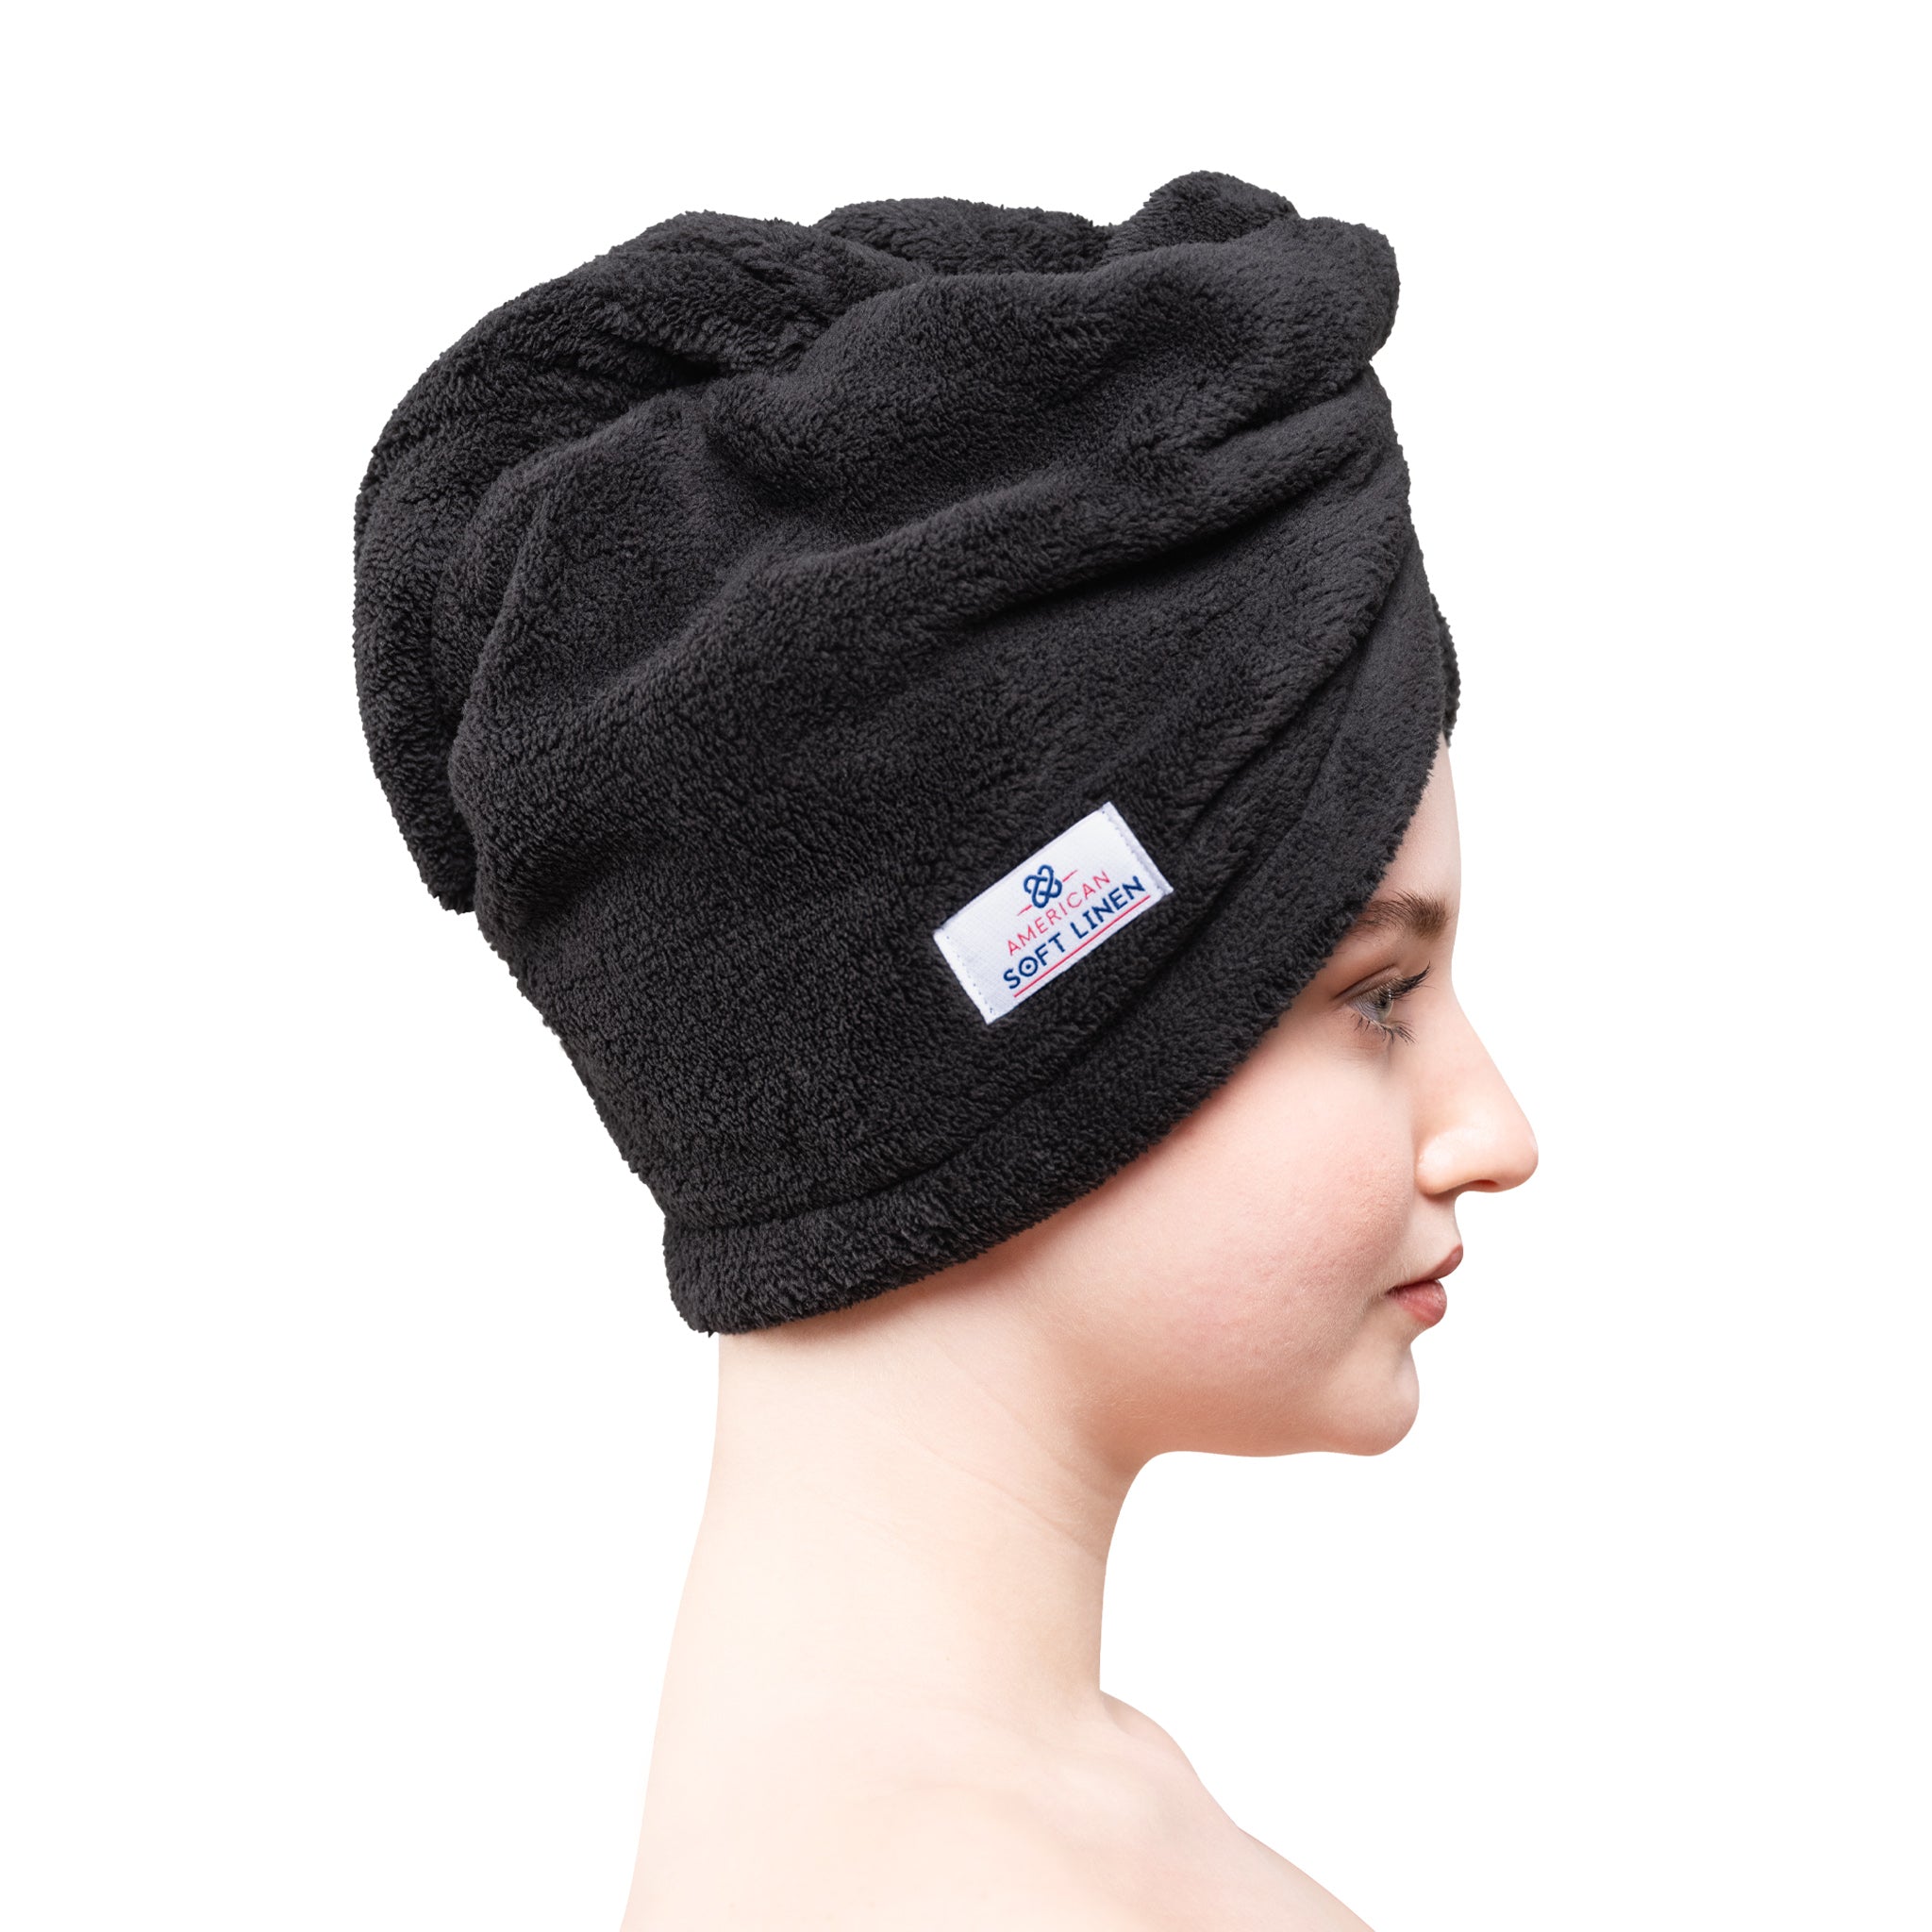 American Soft Linen Extremely Soft Super Absorbent and Fast Drying Hair Towel -black-2